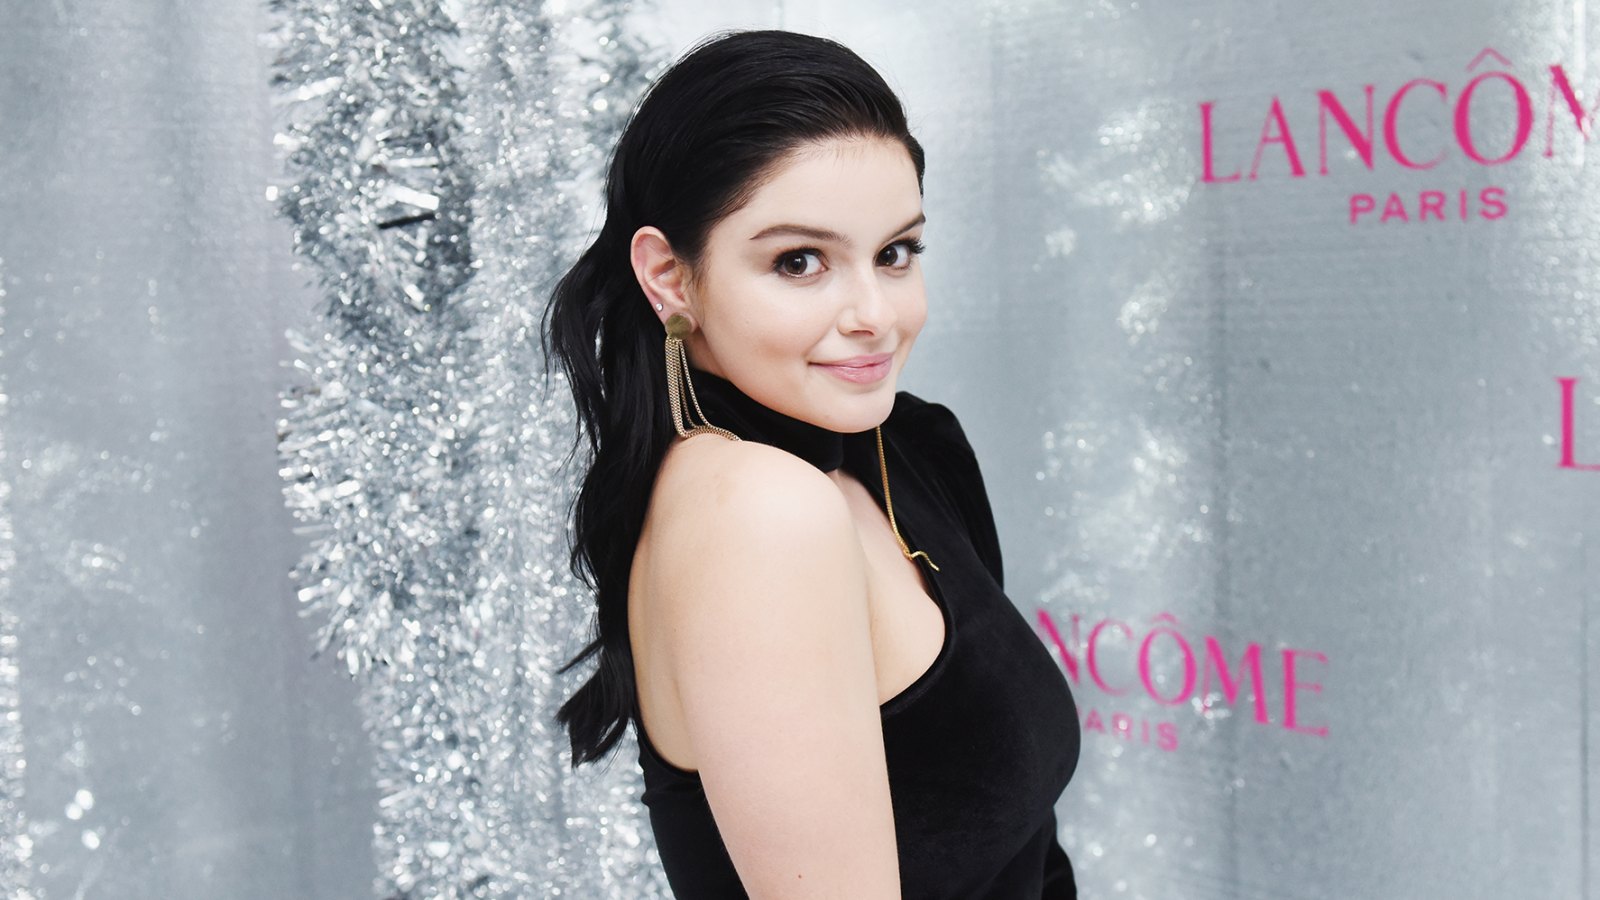 Ariel Winter Claps back at Trolls Who Accuse Her of Using Drugs to Lose Weight